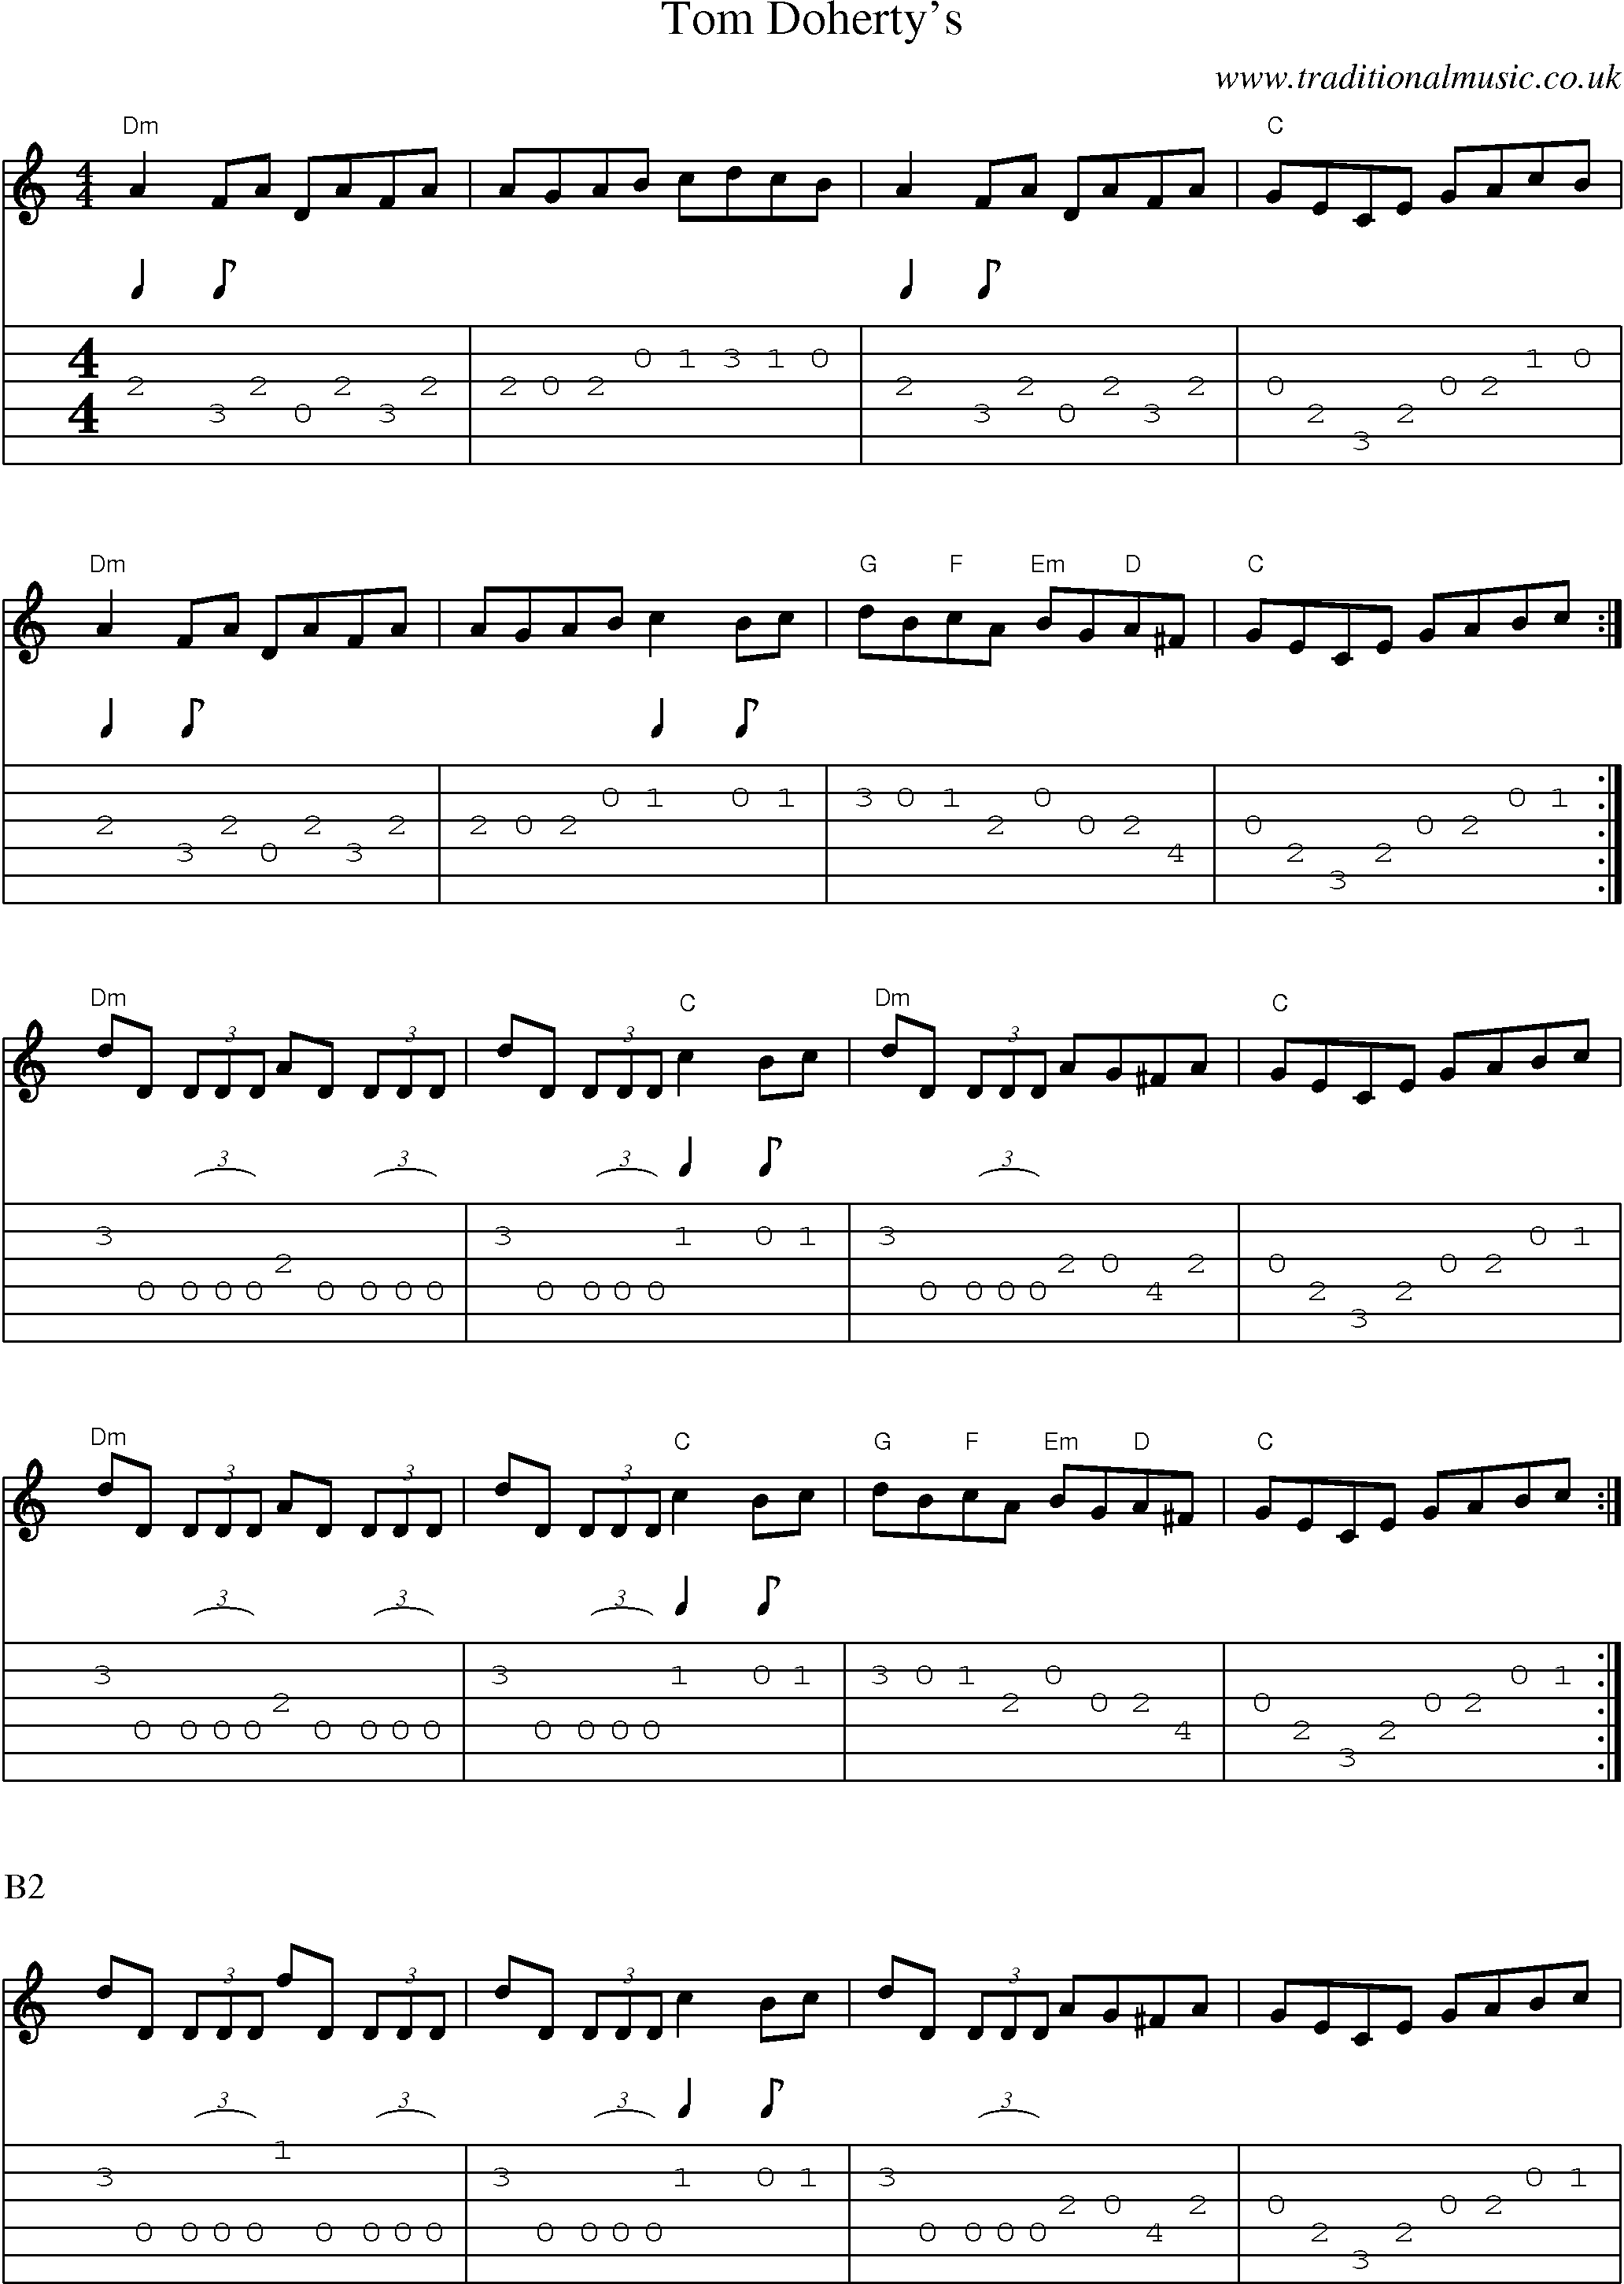 Music Score and Guitar Tabs for Tom Dohertys